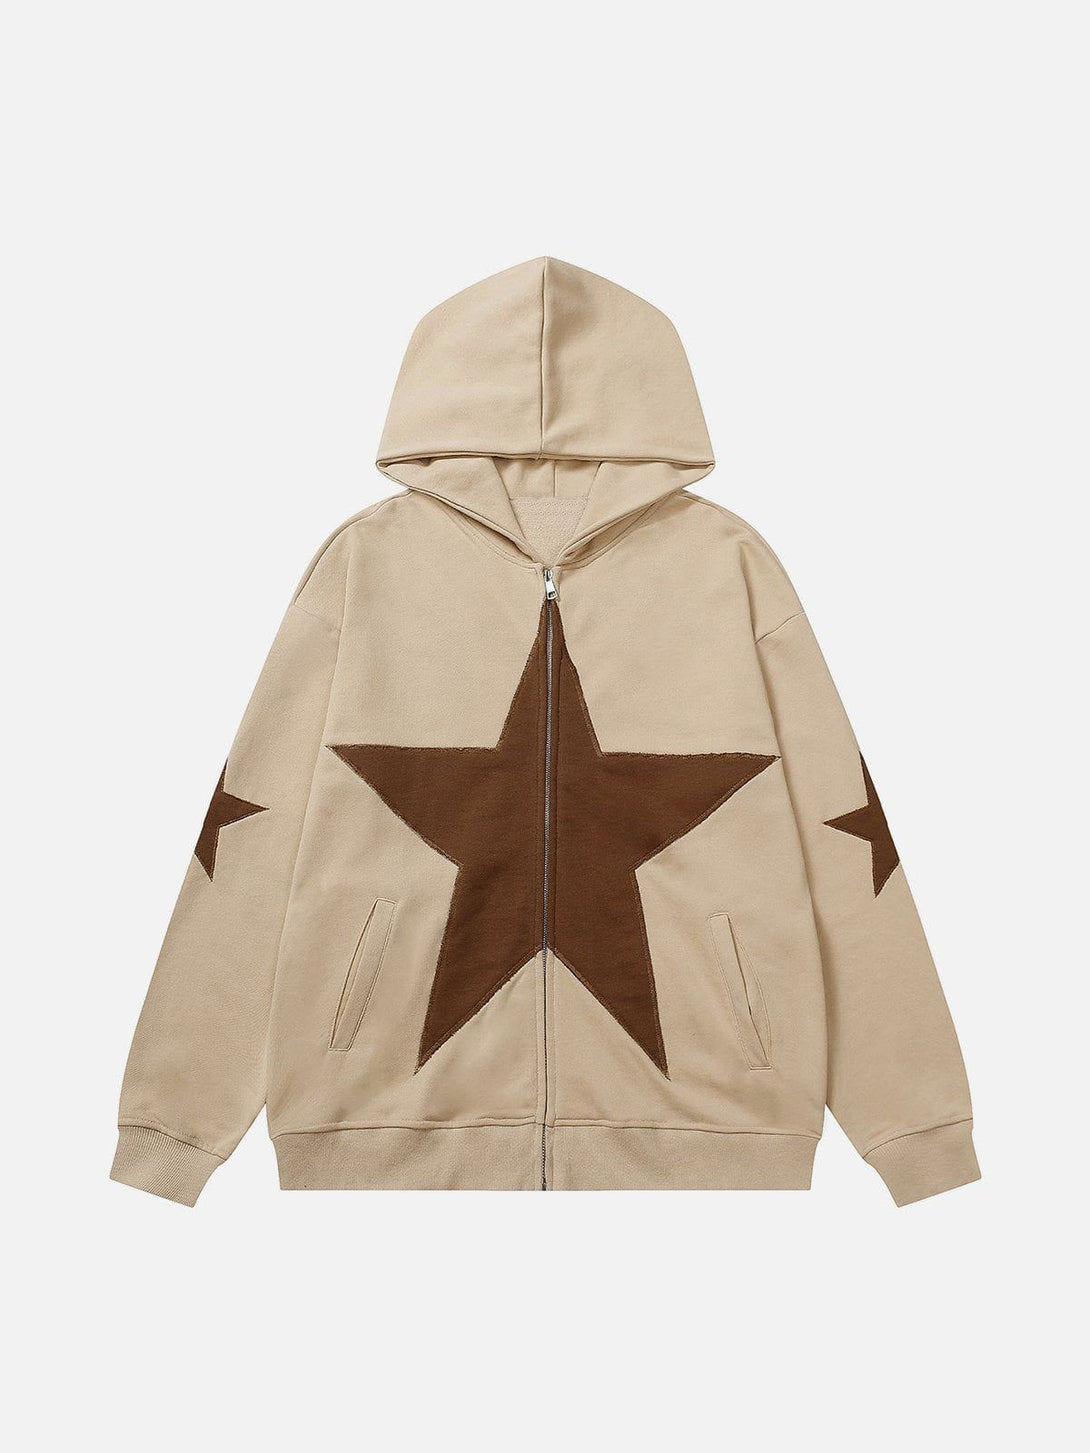 Majesda® - Star Graphic Print Hoodie outfit ideas streetwear fashion